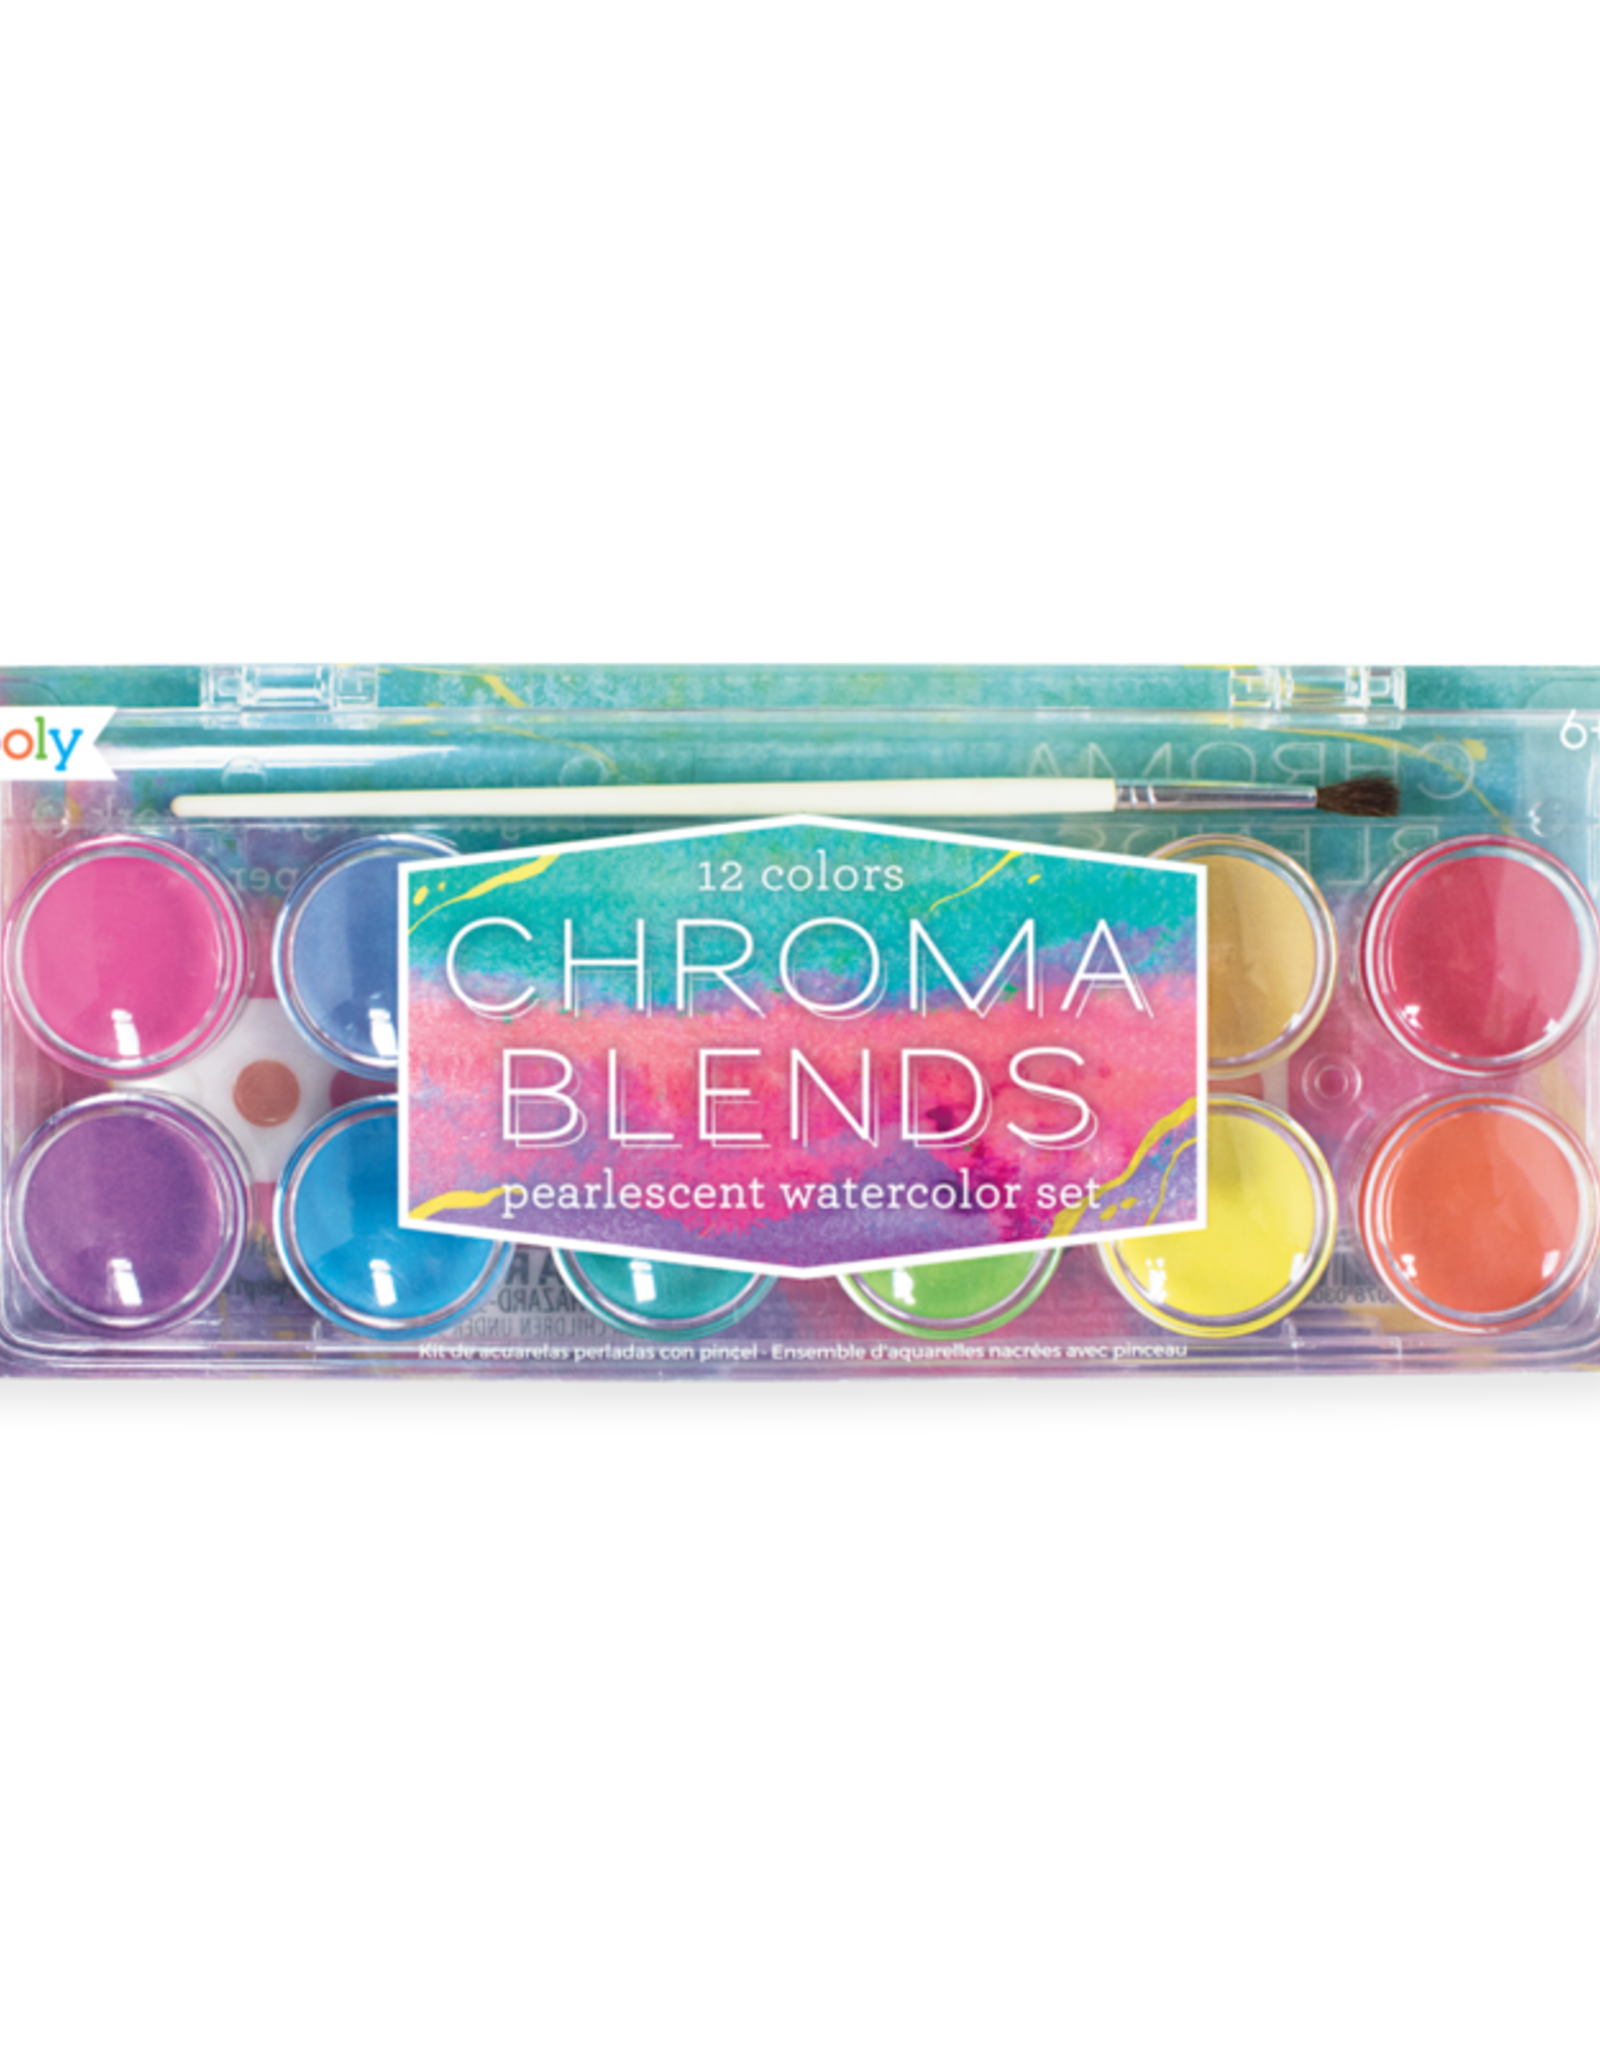 Ooly 13 pc Chroma Blends Pearlescent Watercolor Paint